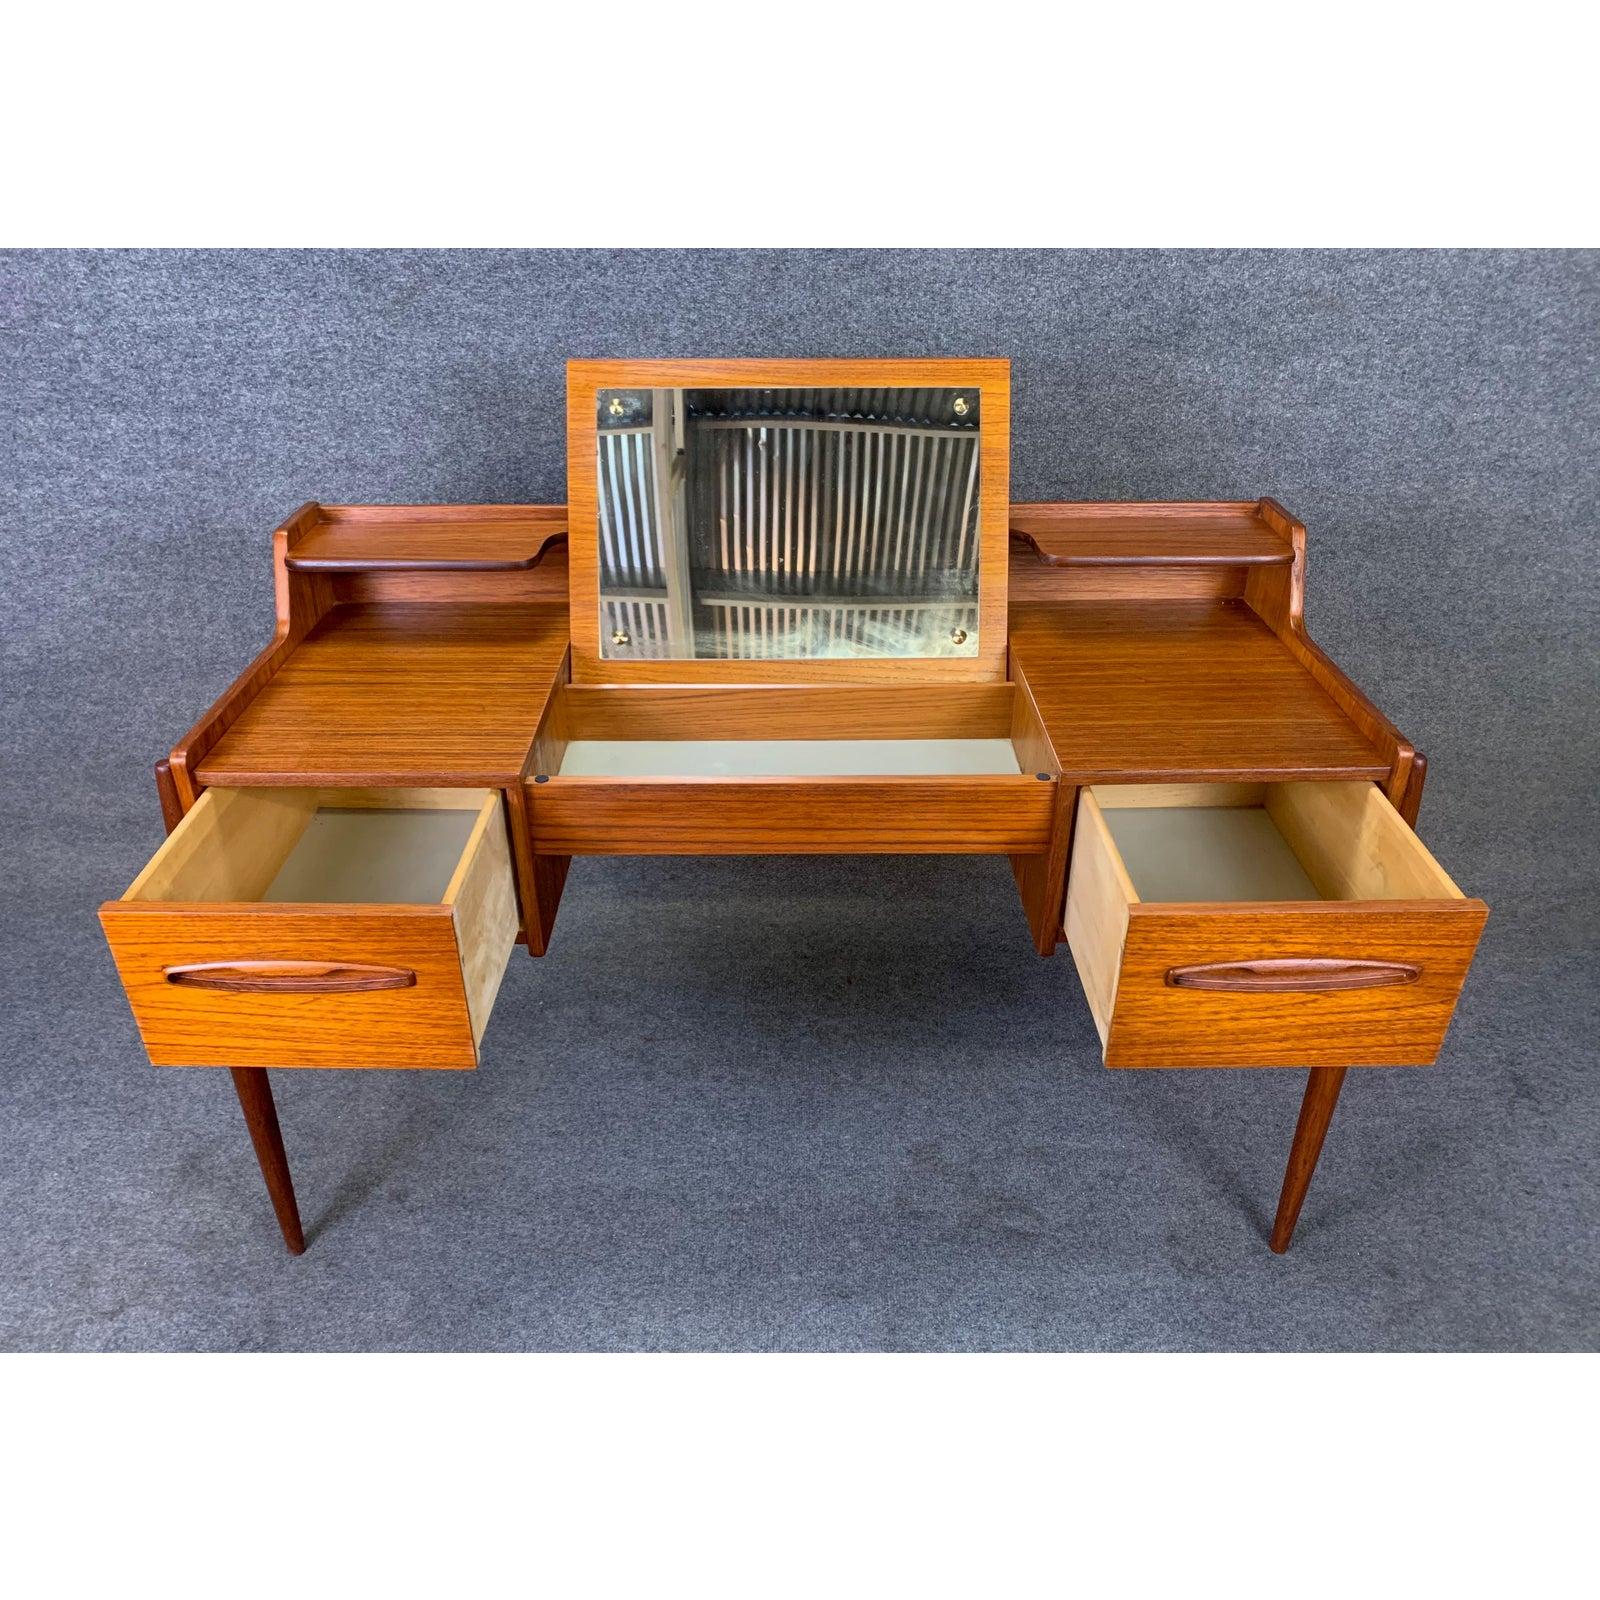 Here is a beautiful Scandinavian Modern teak desk manufactured in Denmark the 1960s.
This sculptural piece, recently imported from Denmark to California before its refinishing, features a vibrant wood grain, two dove tail built drawers with